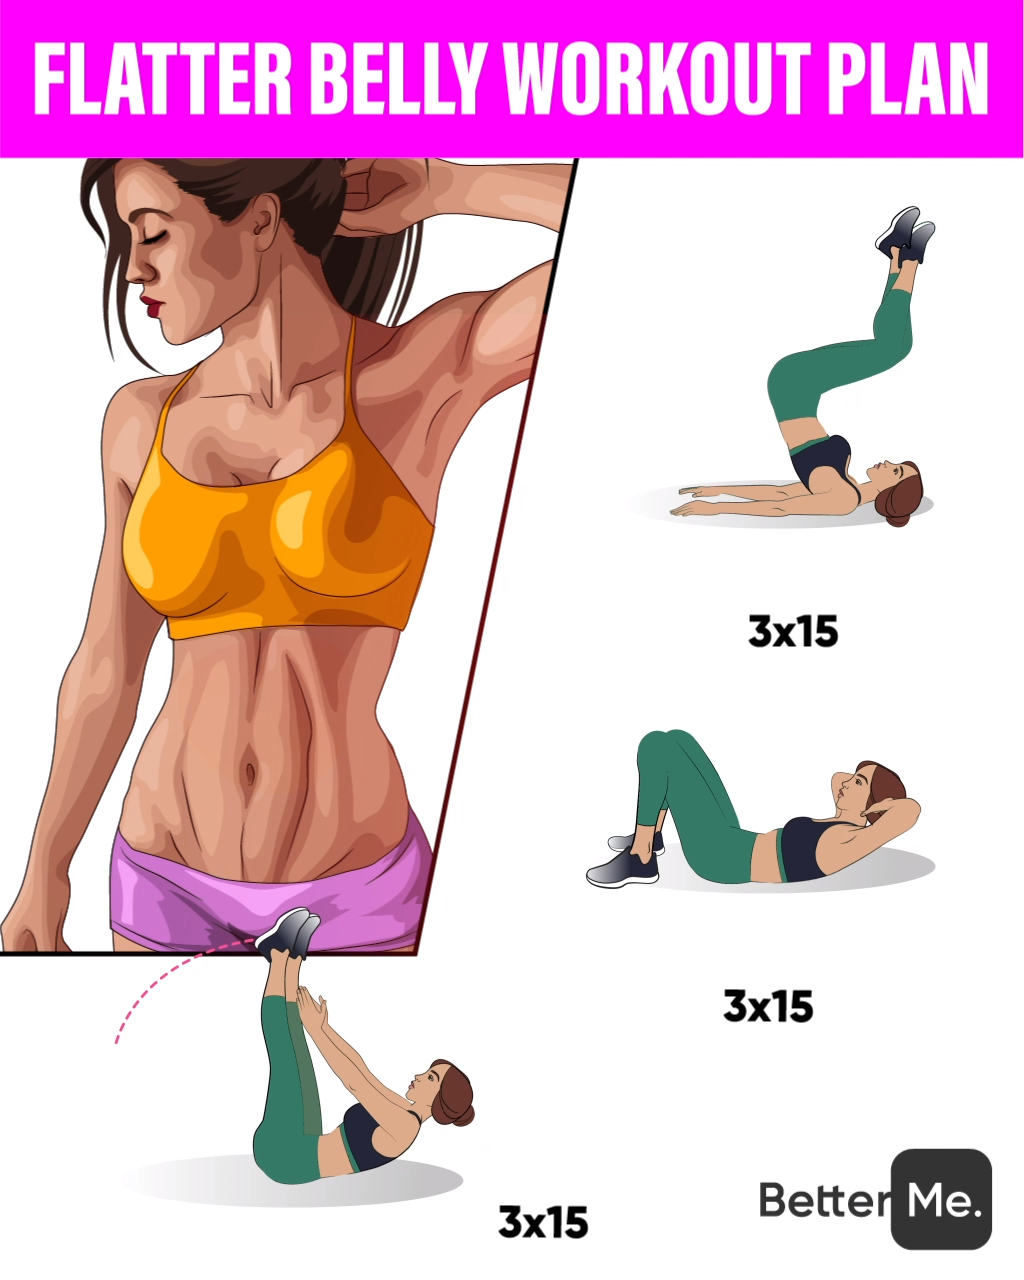 Custom Workout And Meal Plan For Effective Weight Loss! -   23 fitness At Home videos ideas